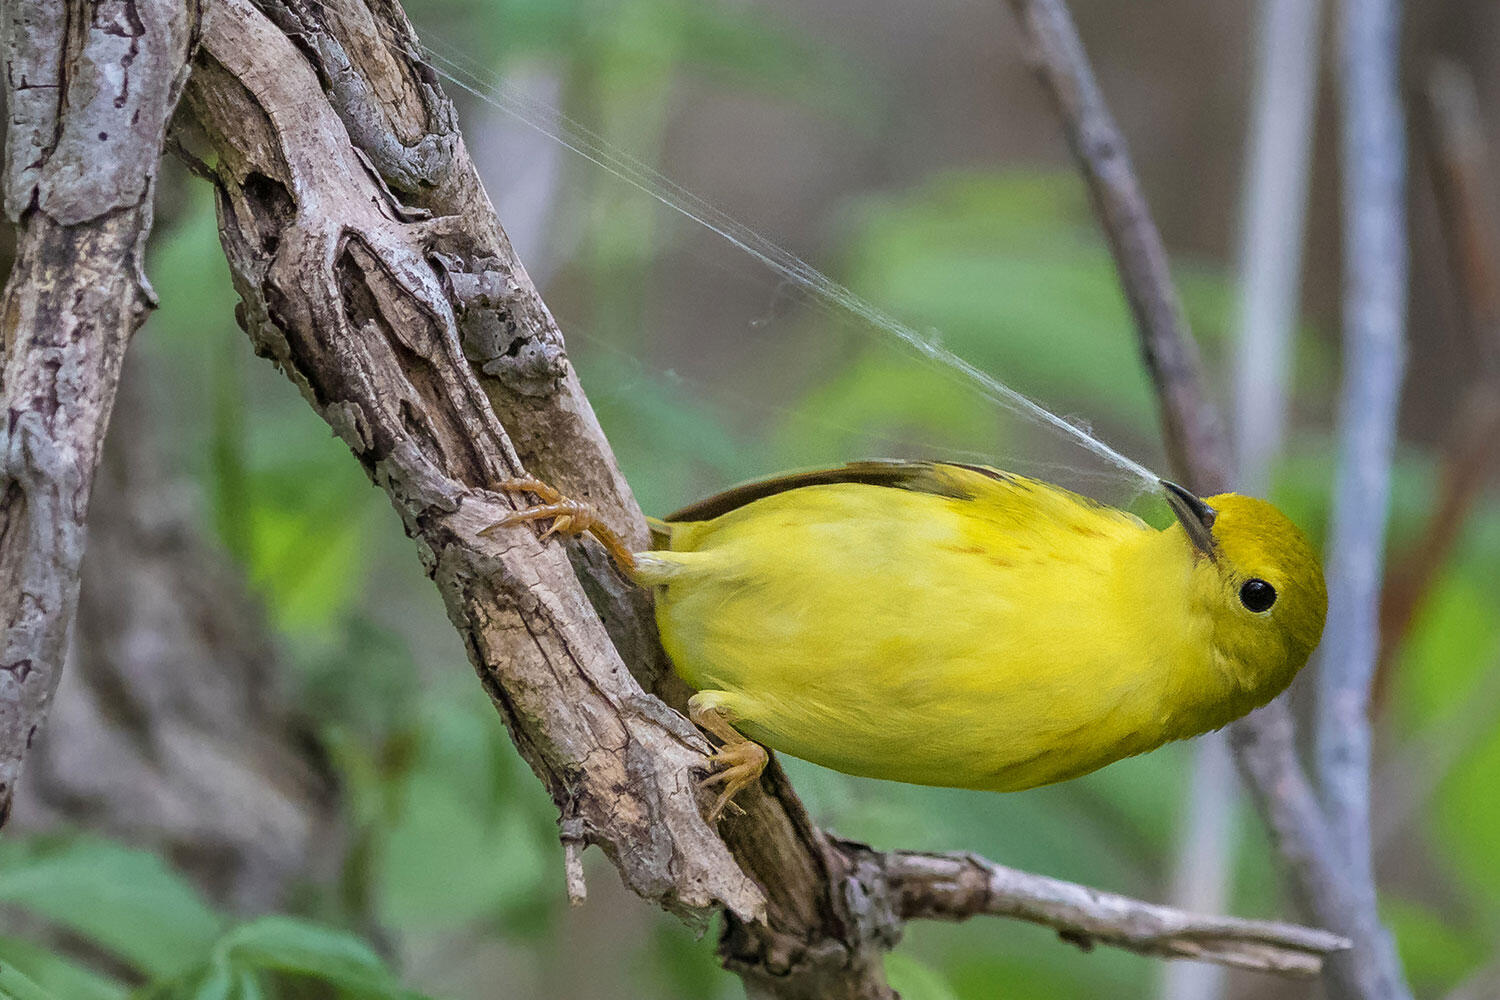 A yellow songbird gathers downy organic material from a tree trunk.